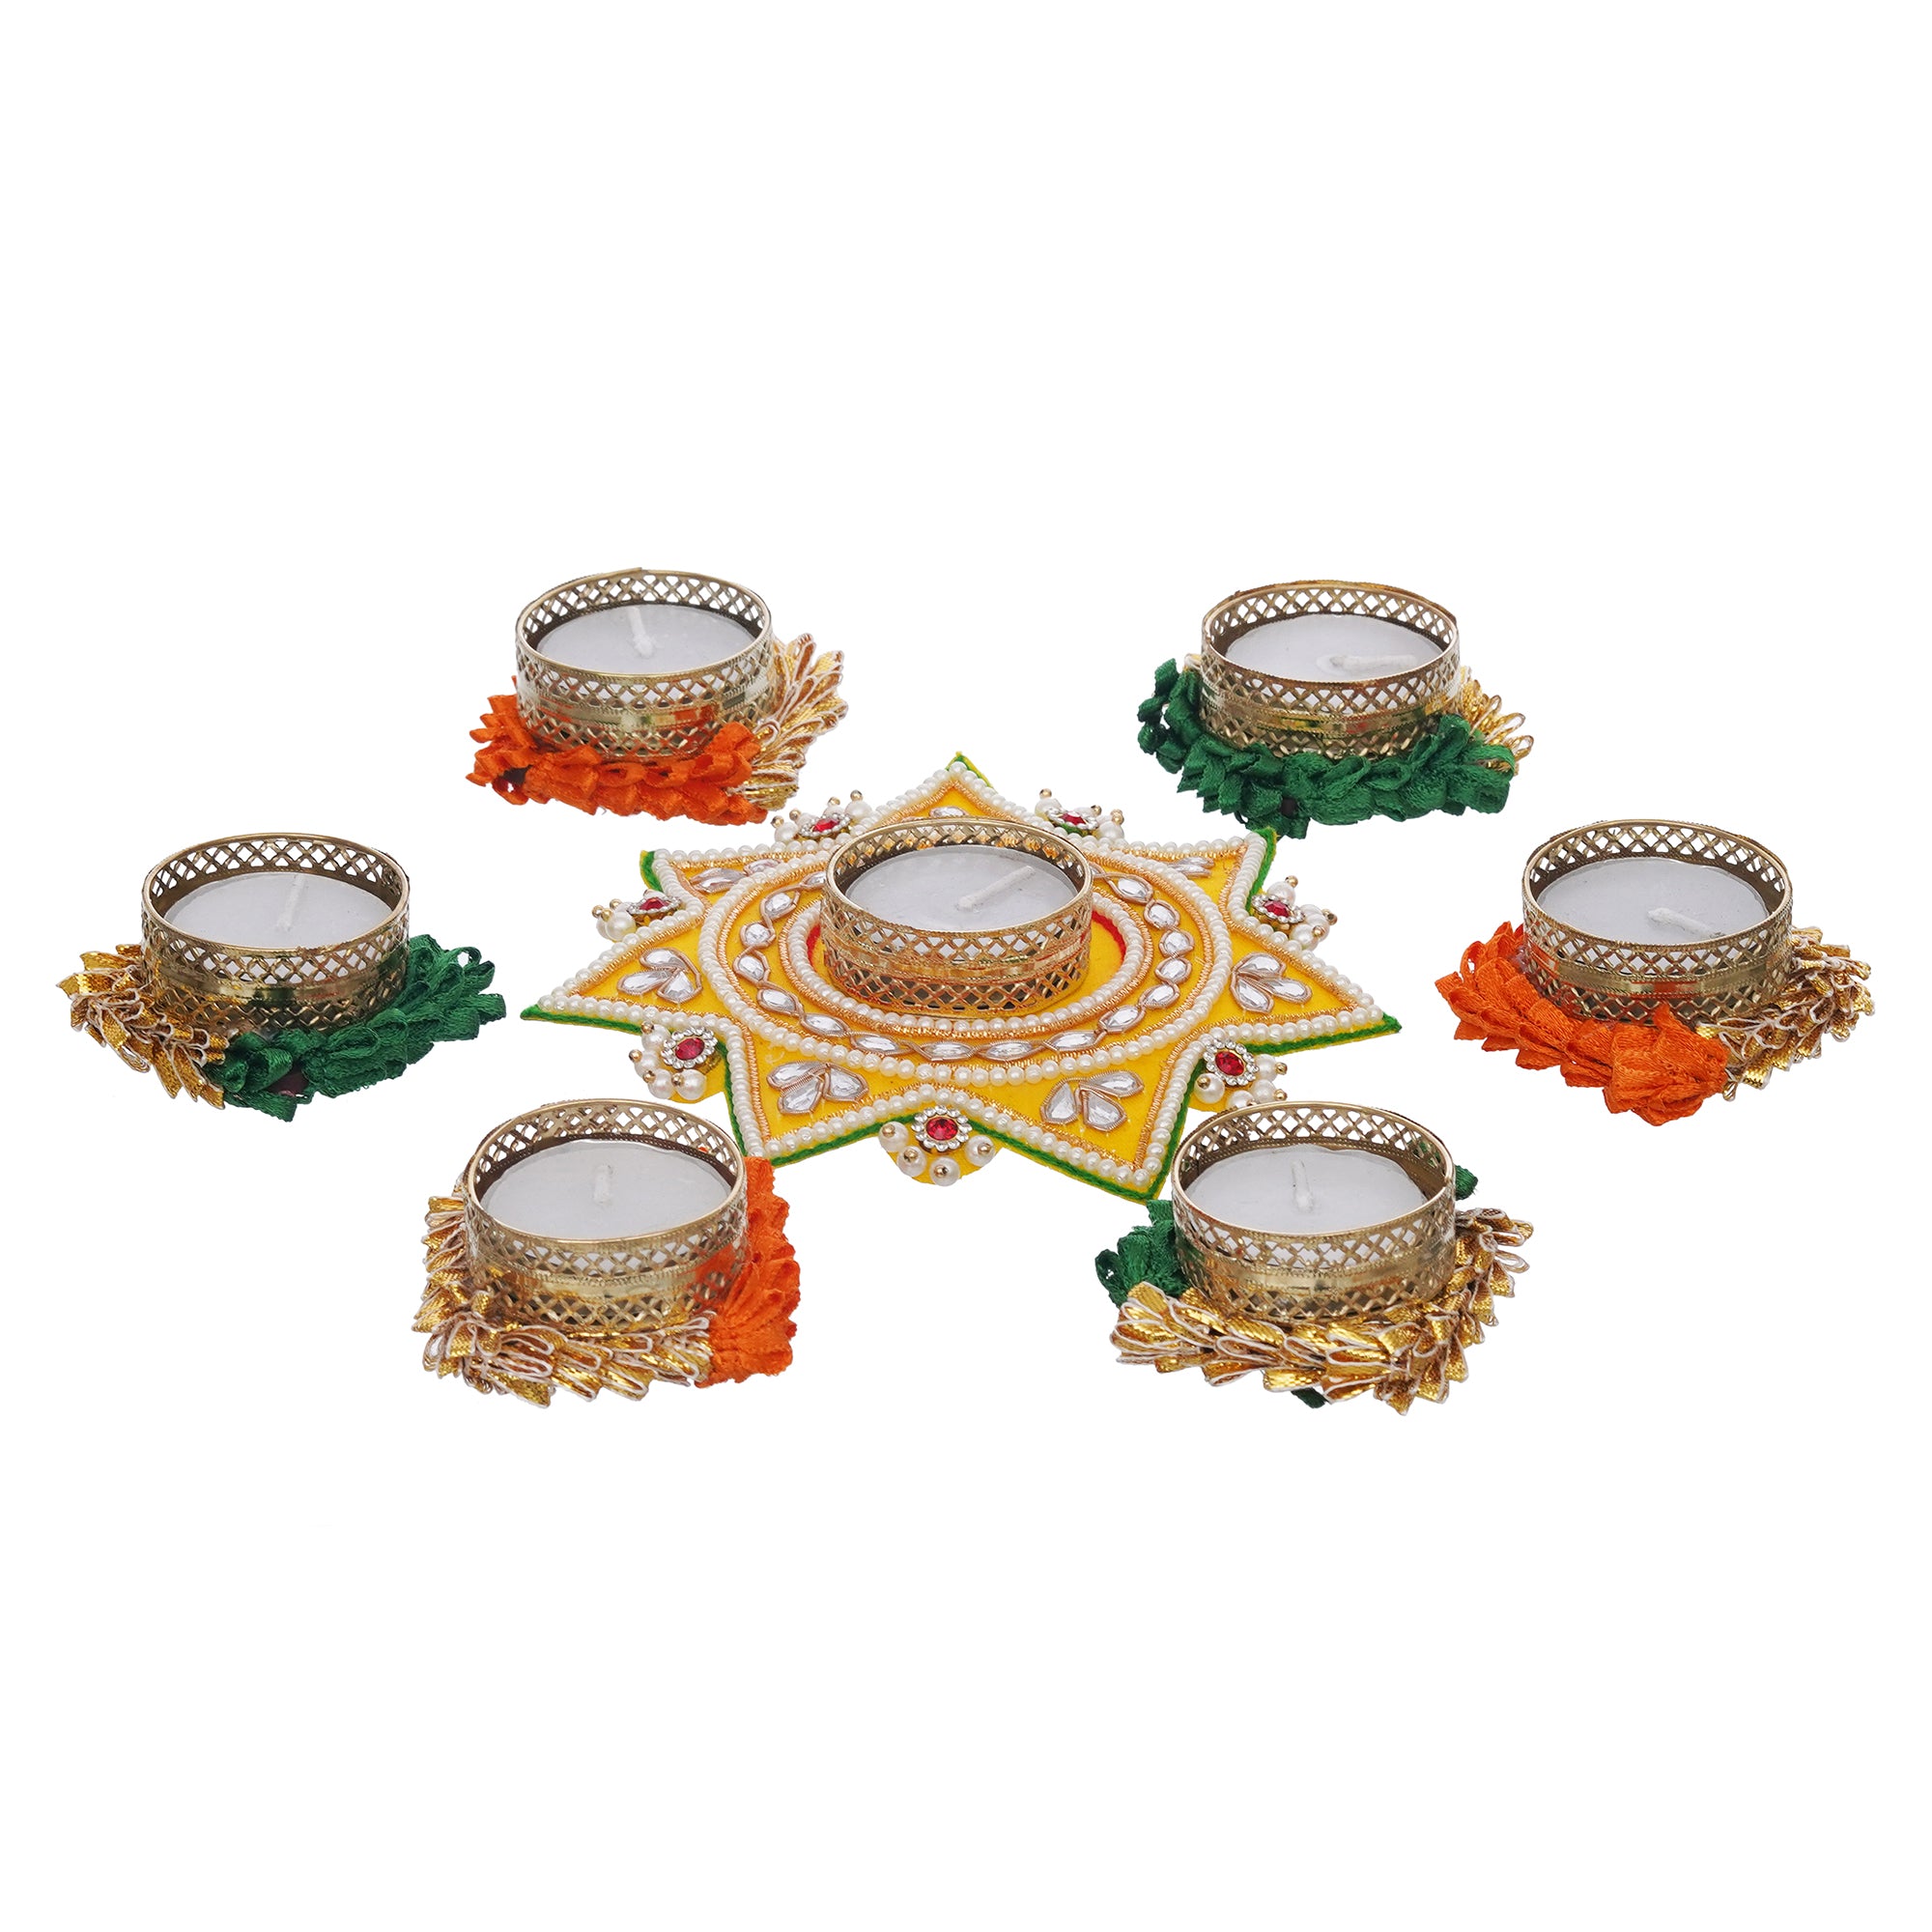 eCraftIndia Set of 7 Round and Star Shaped Diamond Beads and Pearls Decorative Tea Light Candle Holders 7